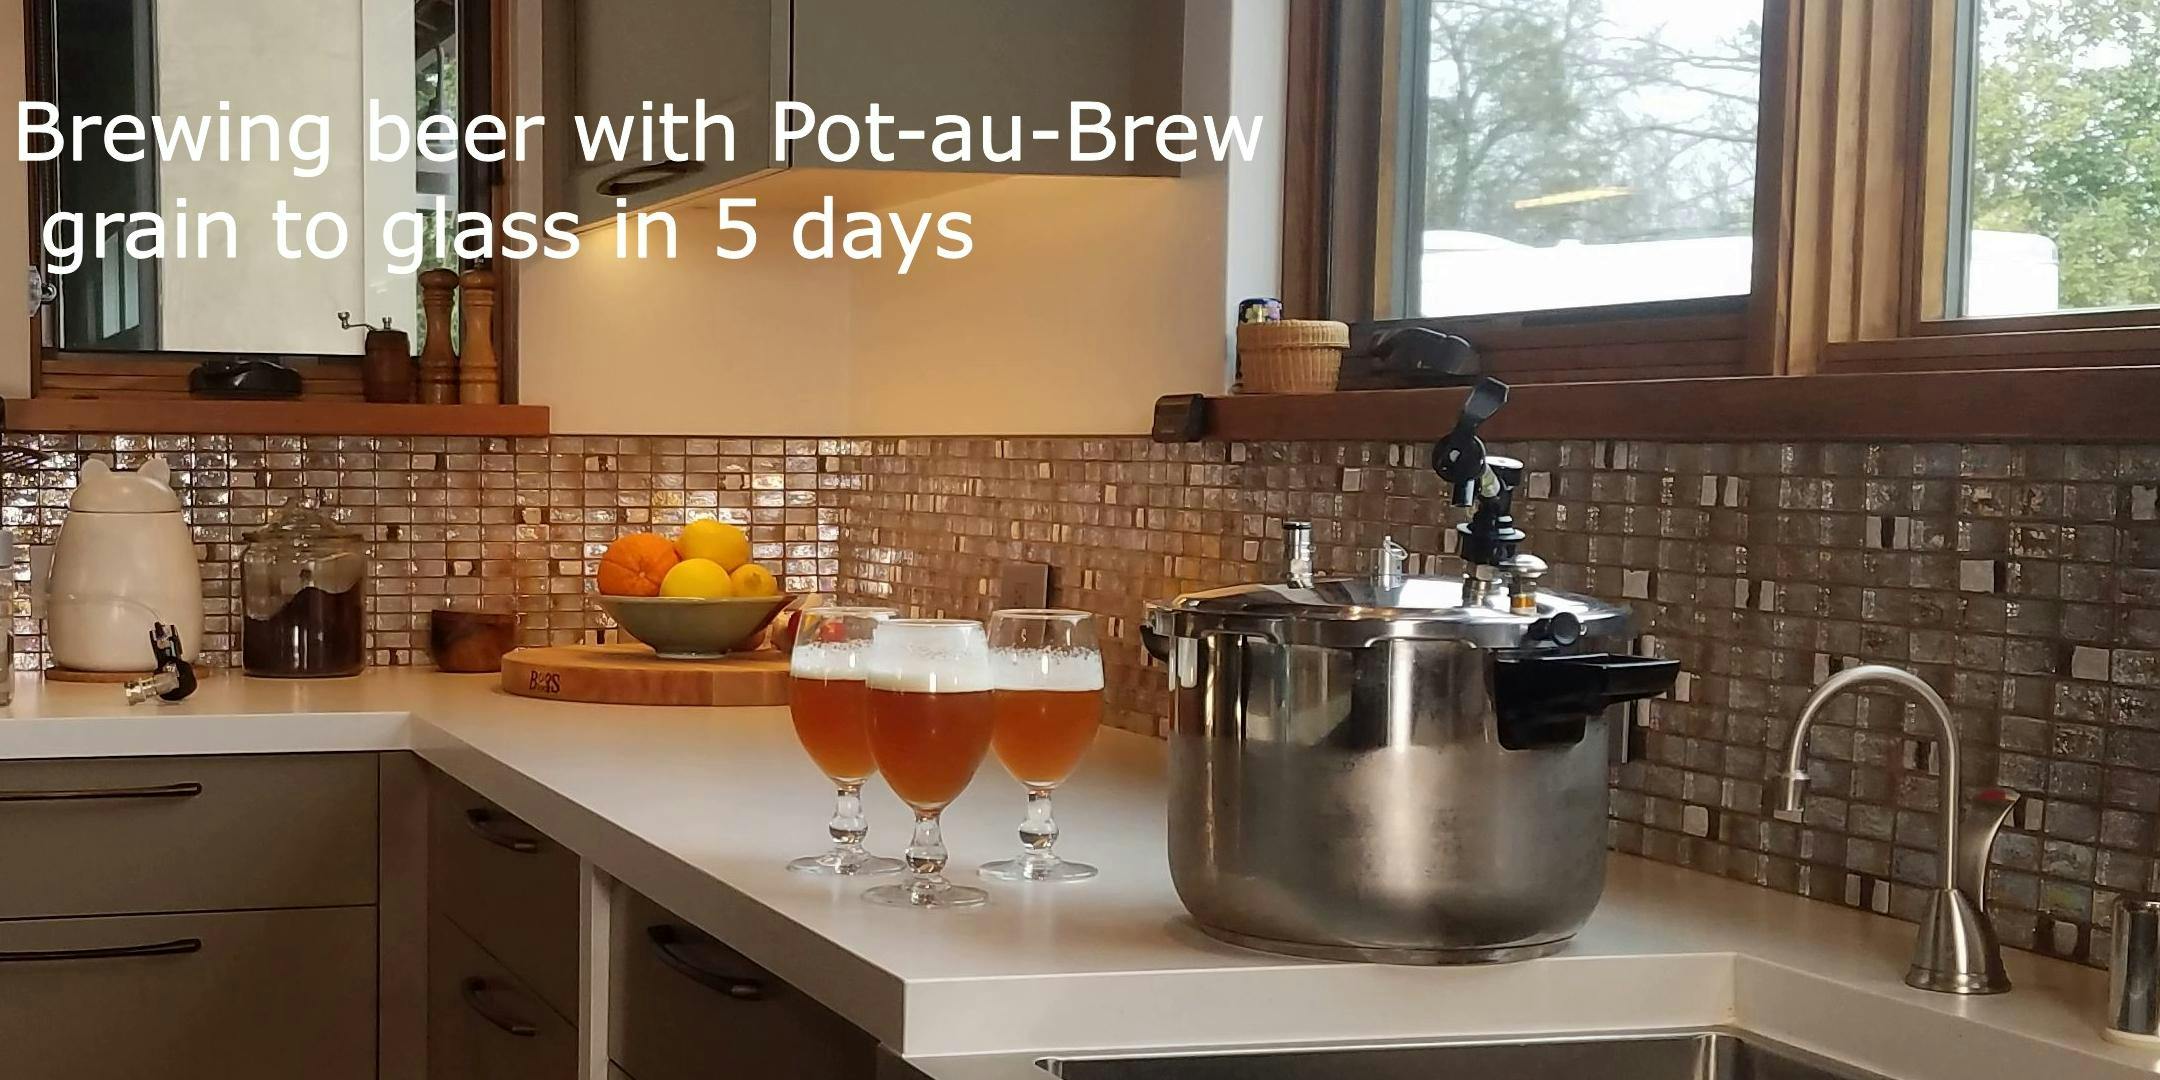 Making beer - grain to glass in 5 days - with our ecofriendly Pot-au-Brew